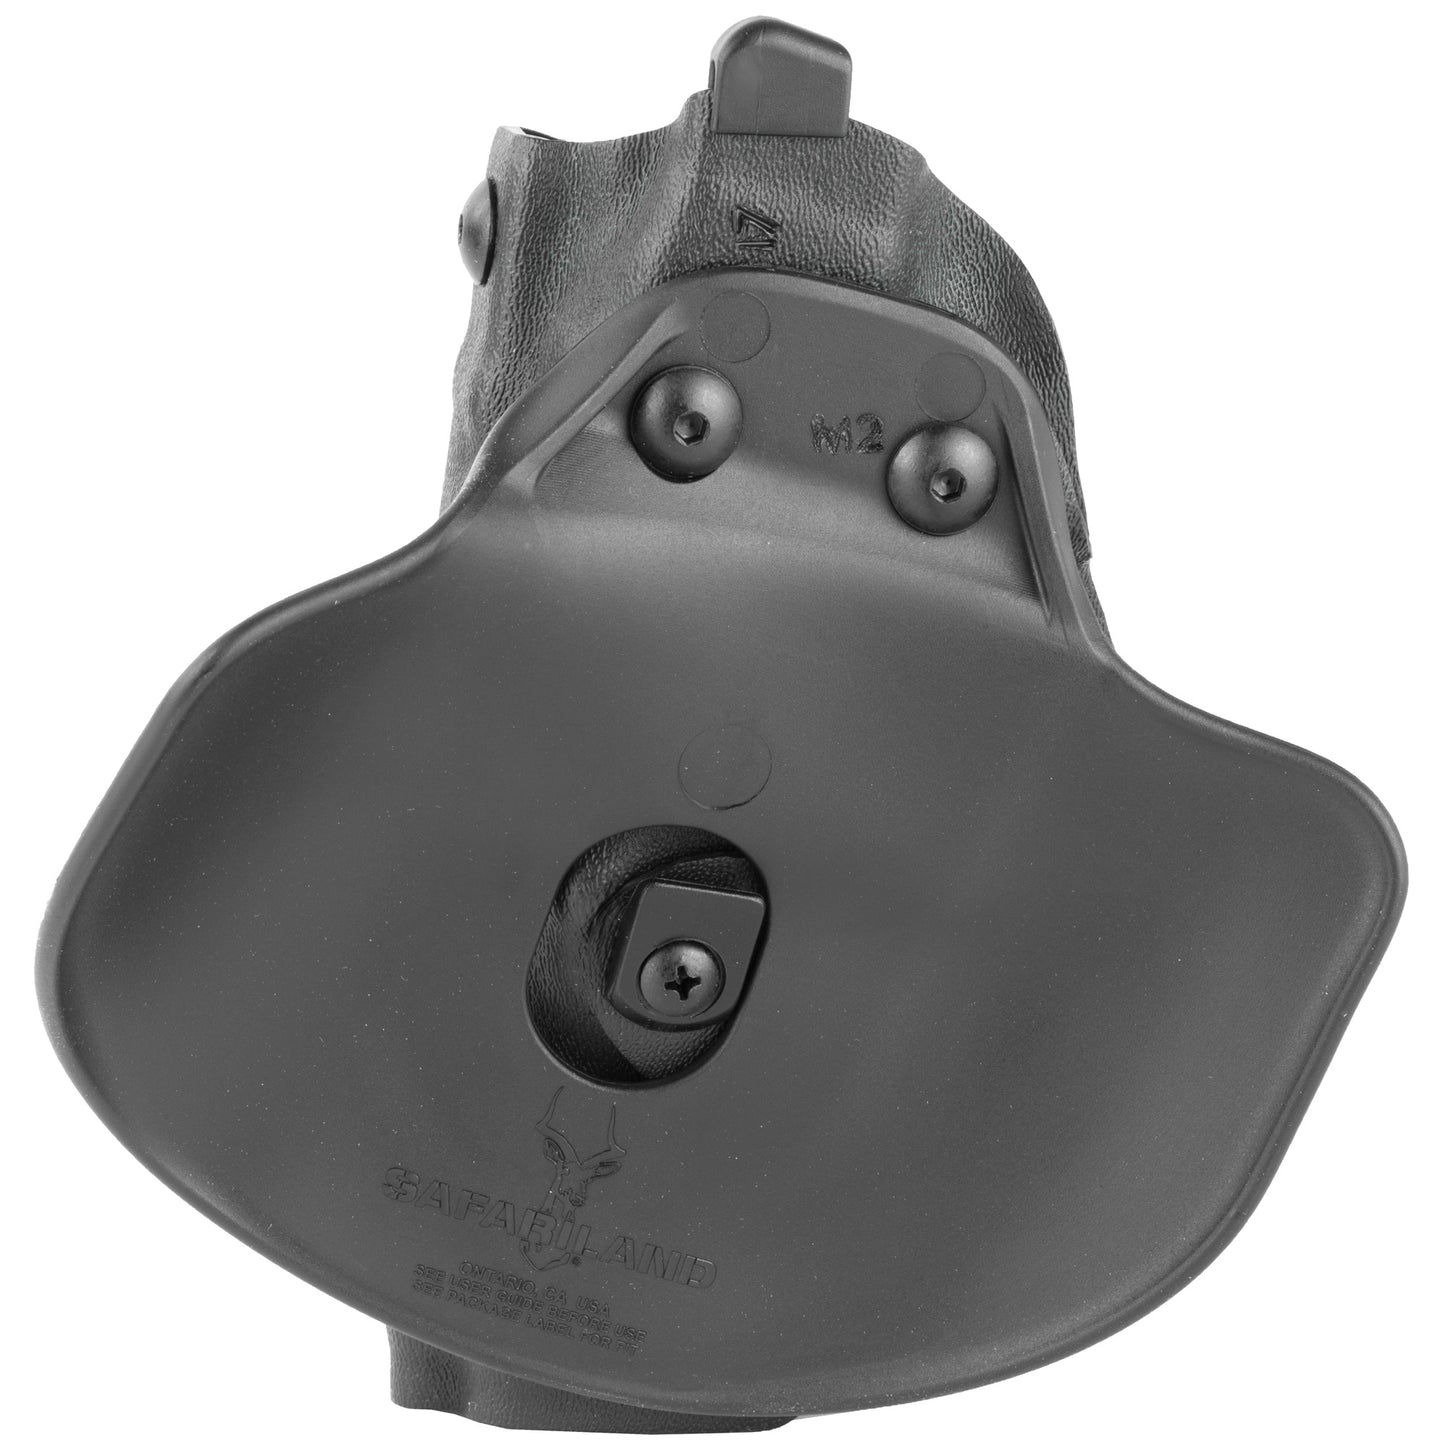 Safariland 6378 ALS Paddle Holster Fits Glock 19/23 w/ 4" Right   6378-283-131